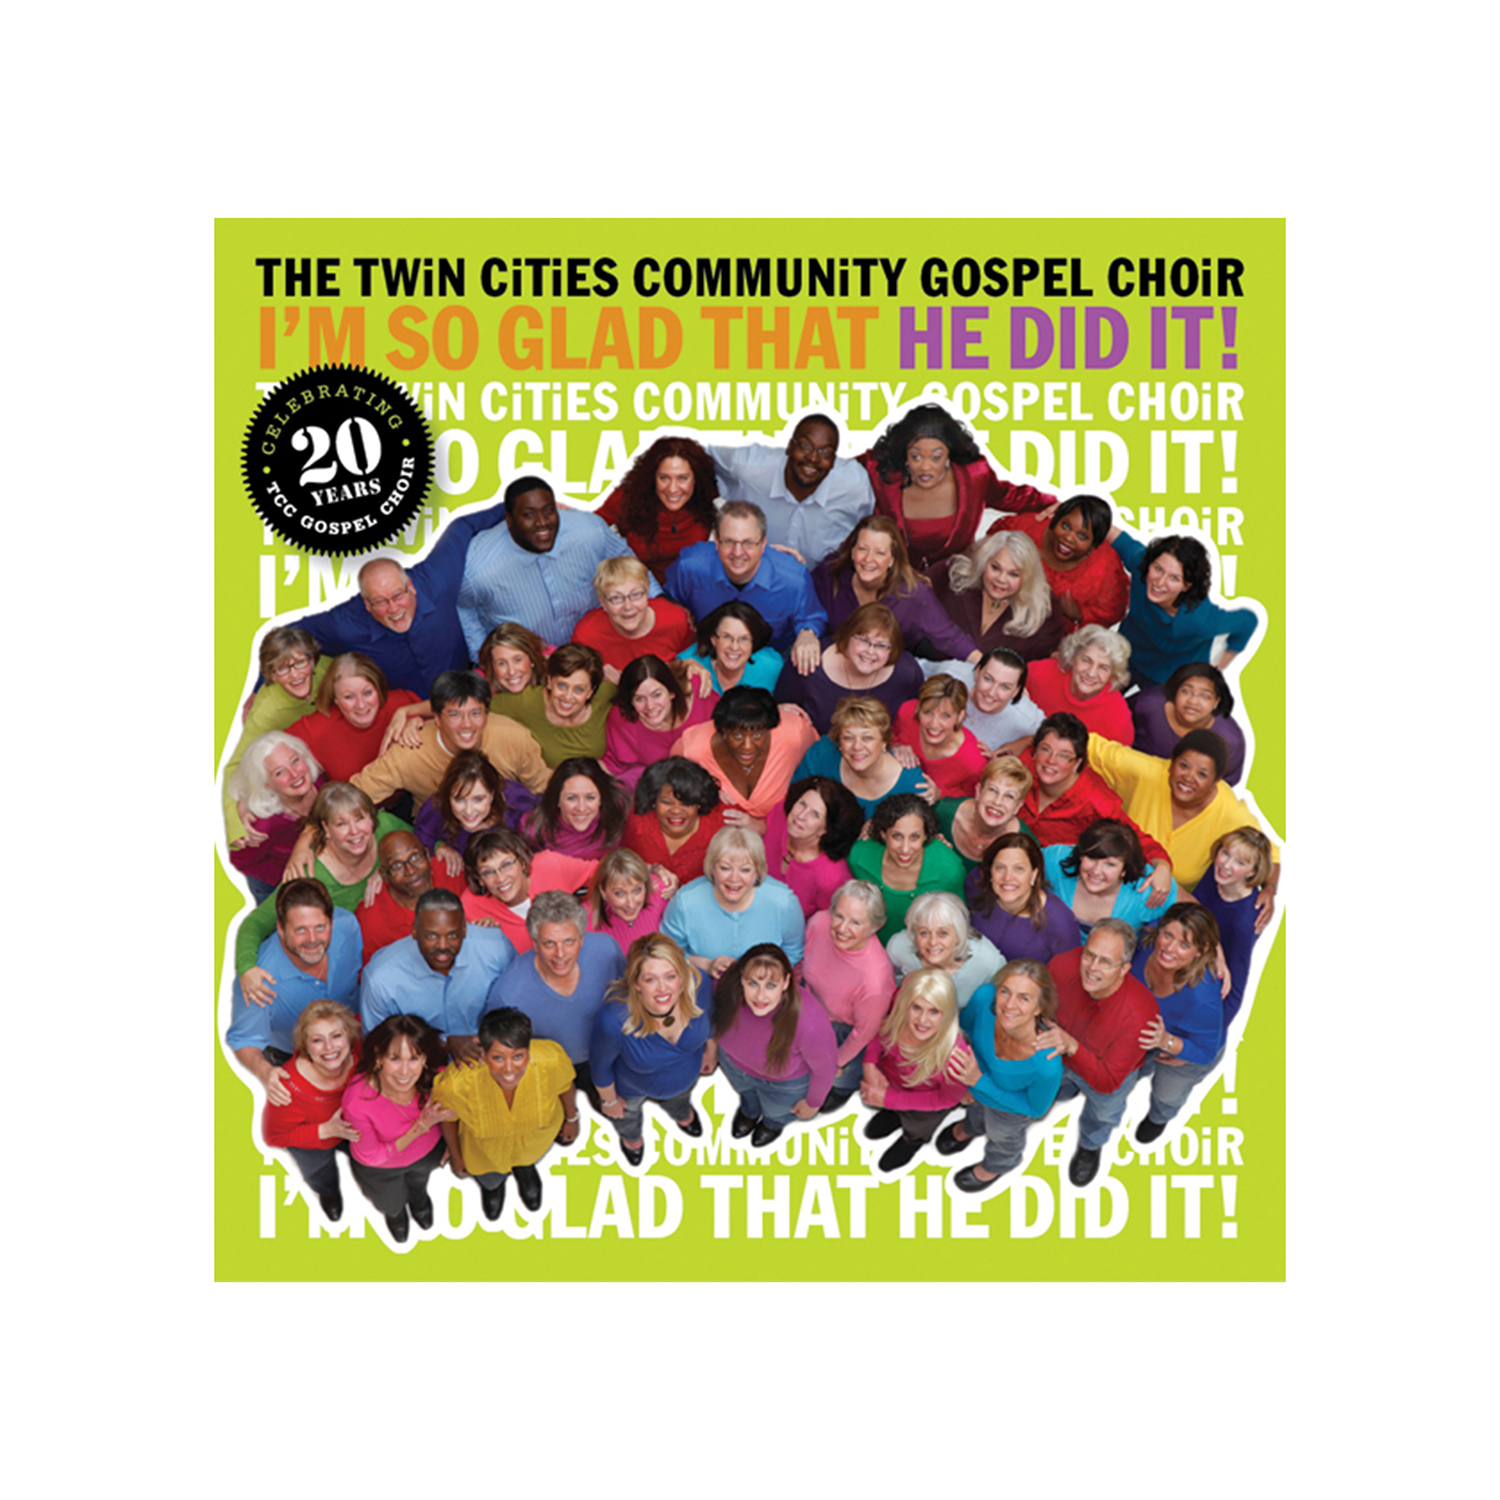   He Did It  cd cover for the TCC Gospel Choir 